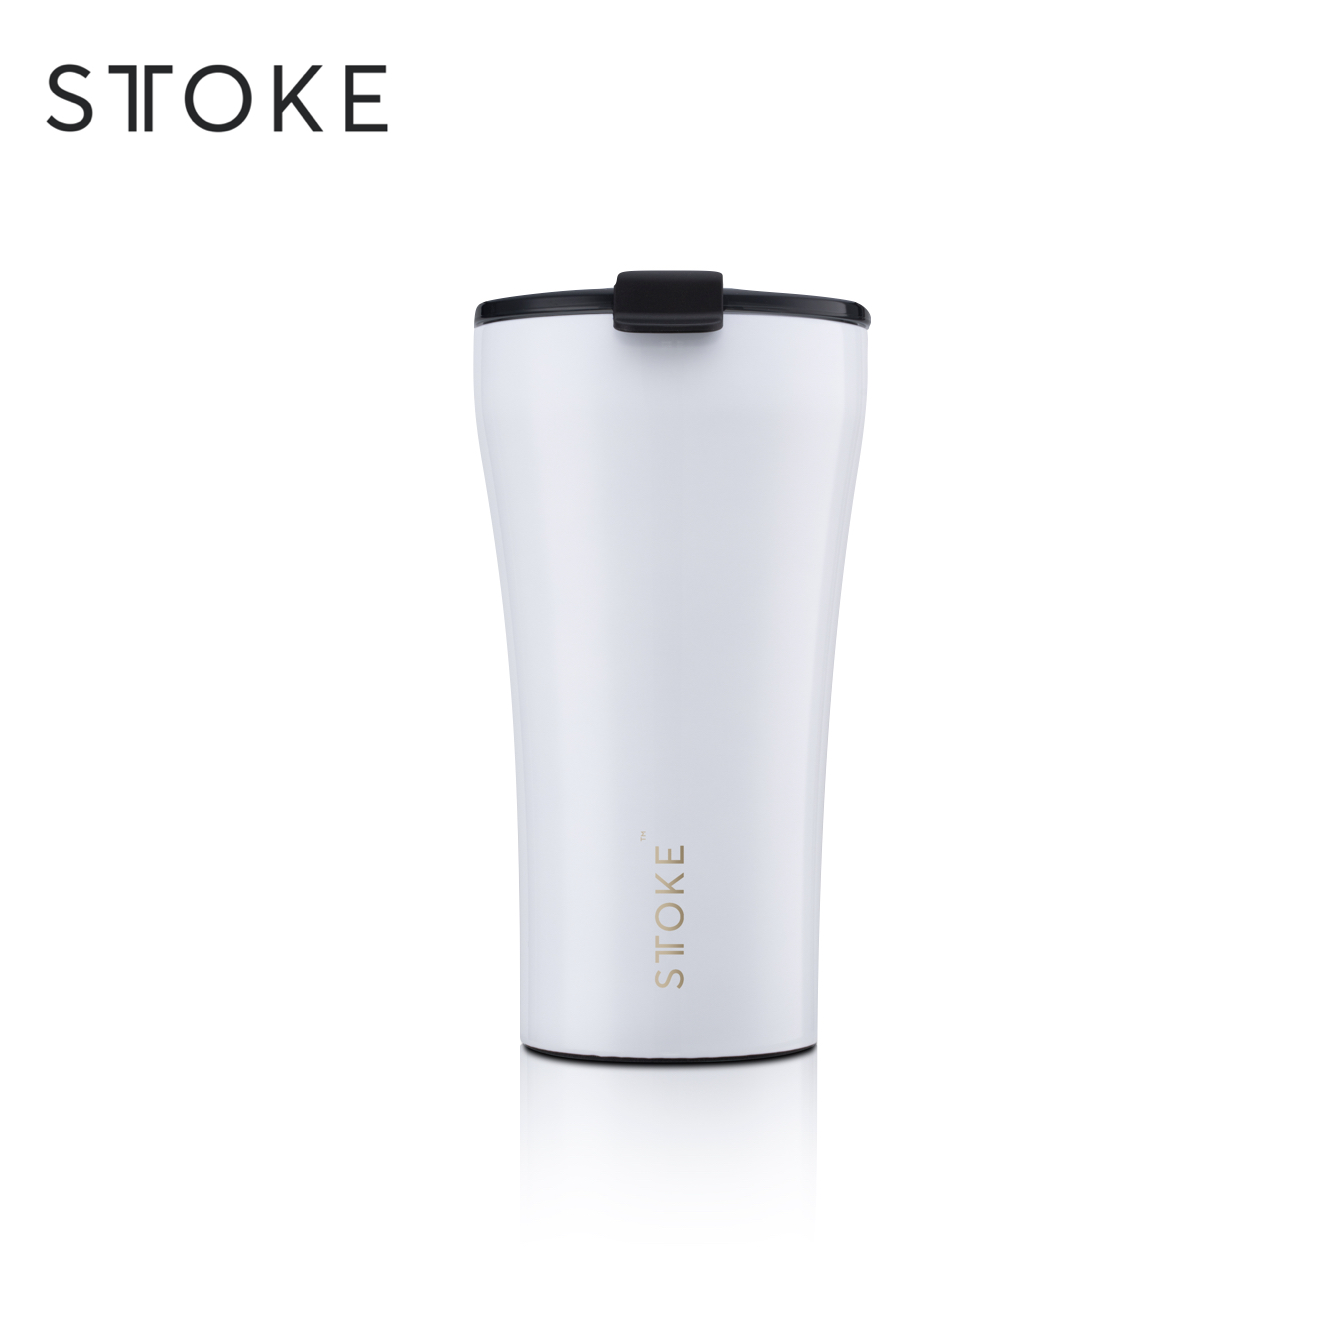 Sttoke Leakproof Ceramic Cup 12 oz - Angel White